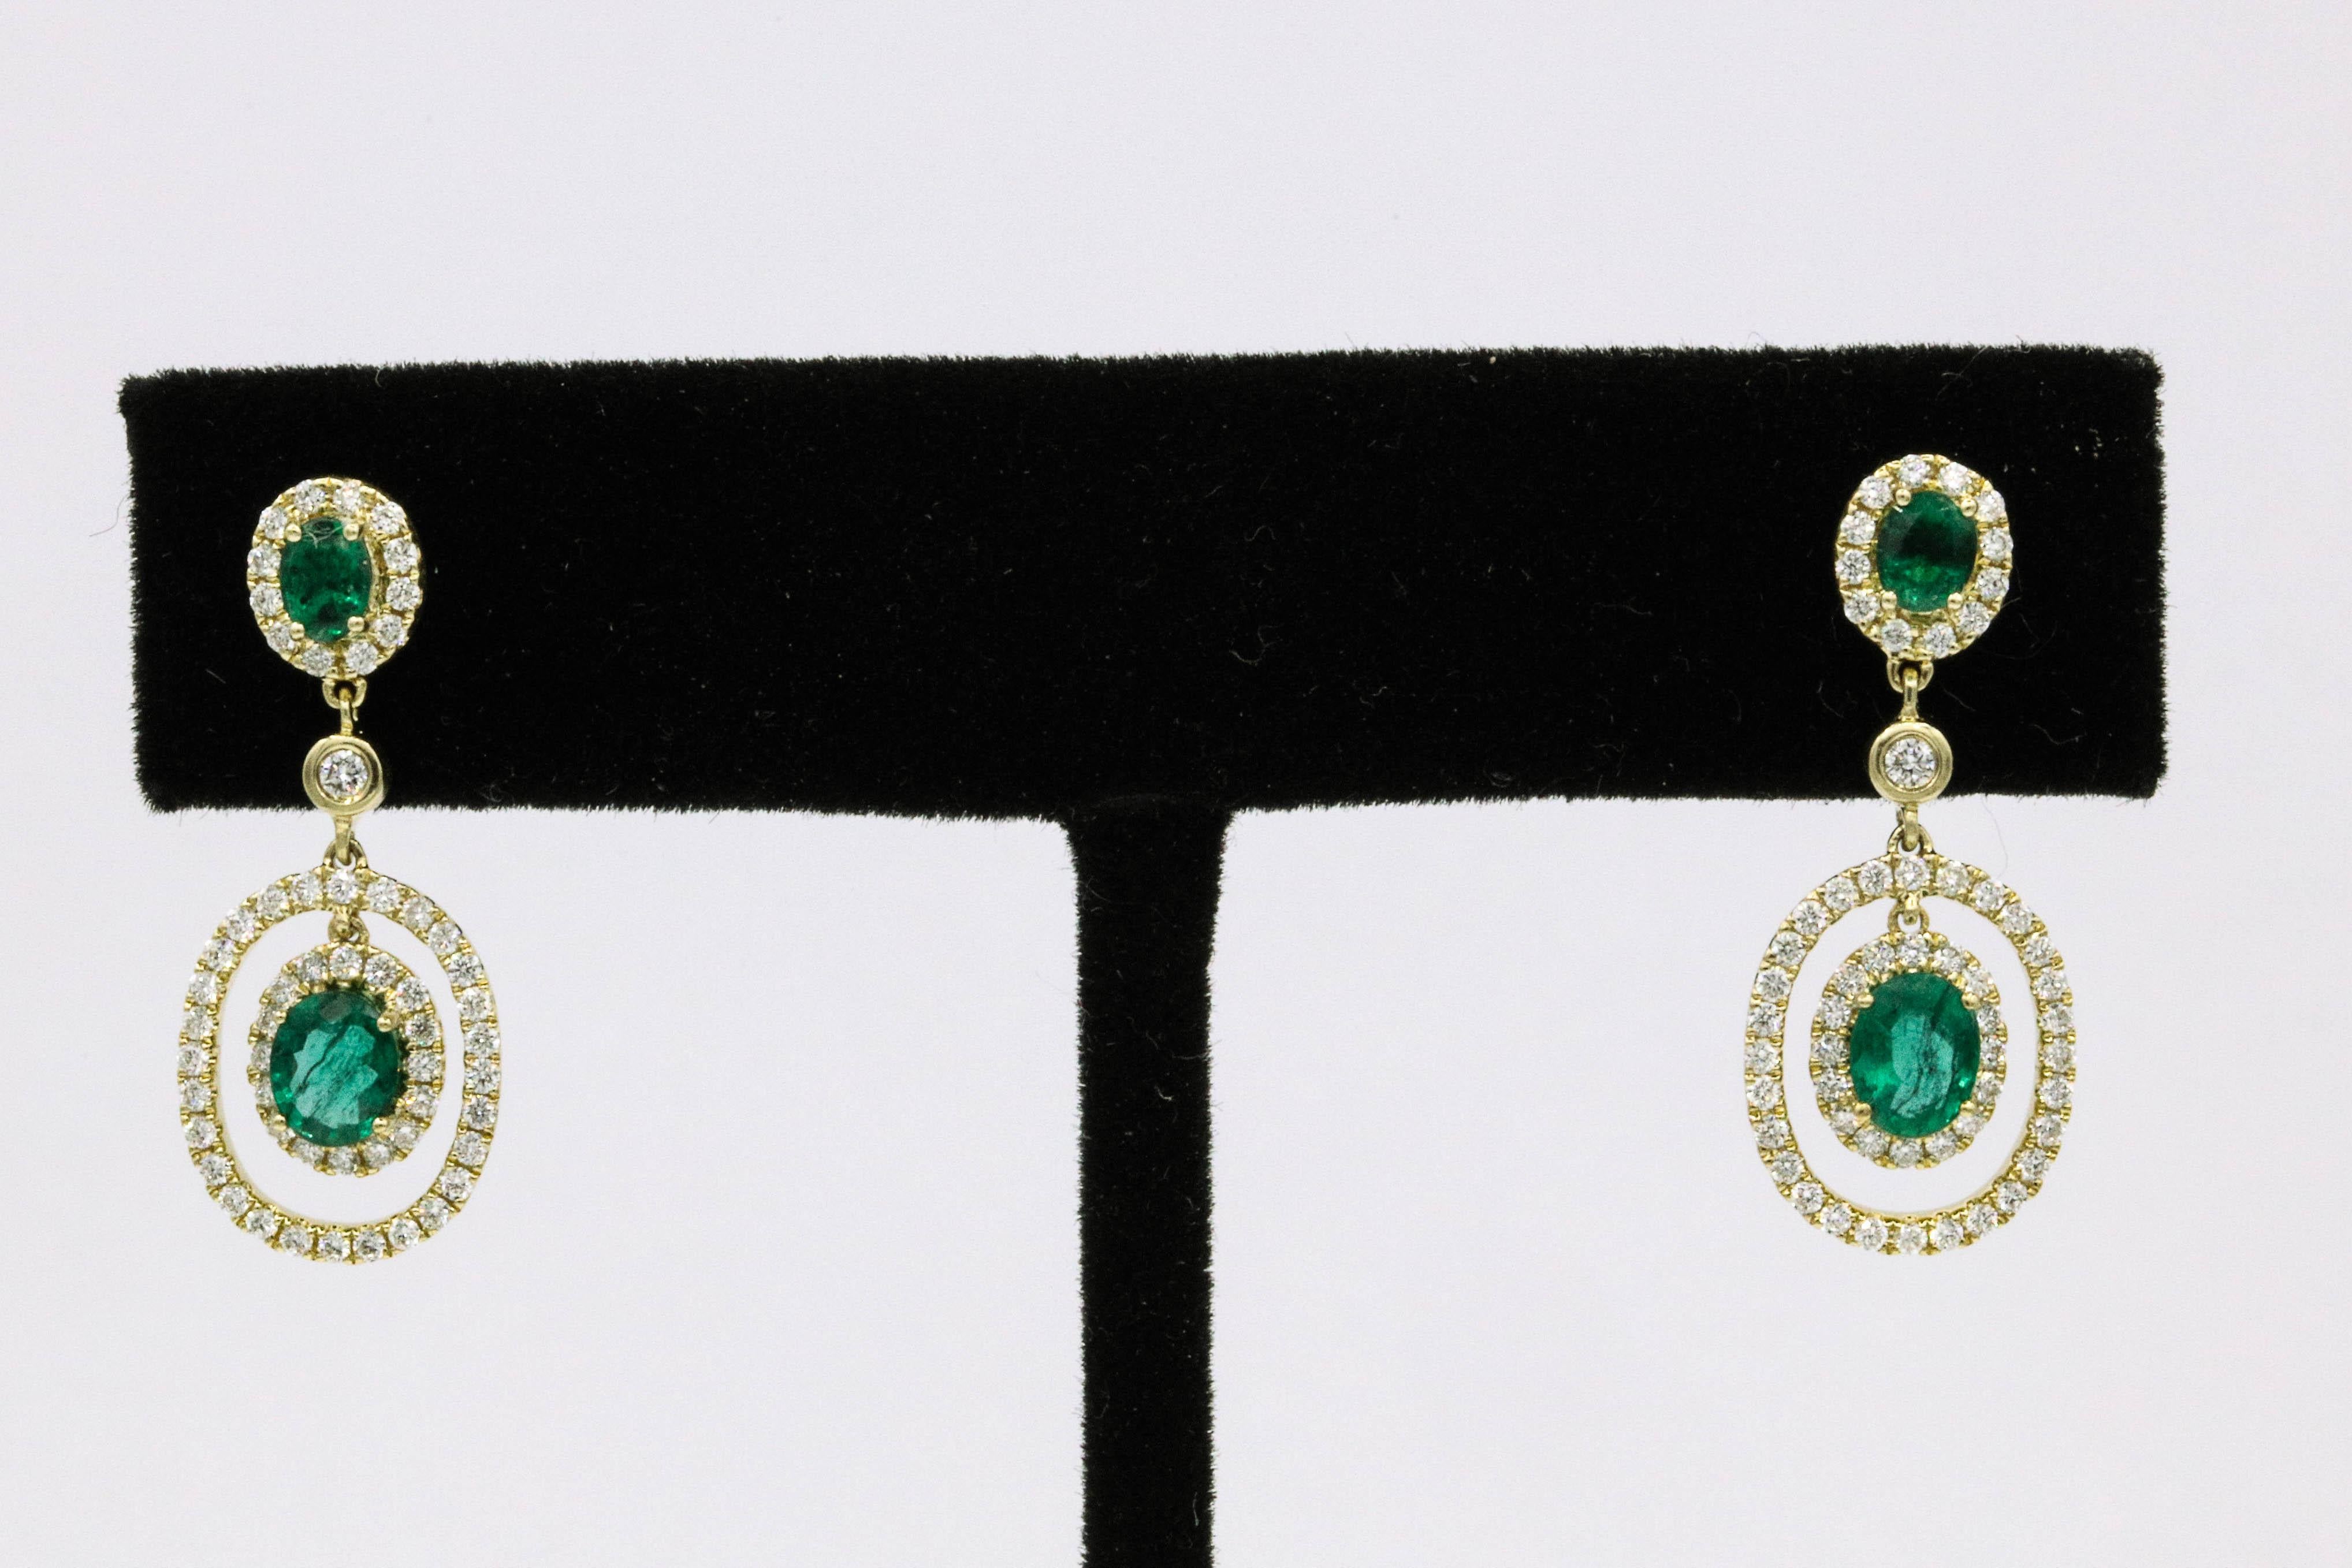 14K Yellow gold drop earrings featuring four green emeralds, 1.14 carats, surrounded by round brilliants weighing 0.65 carats.
Color G-H
Clarity SI
